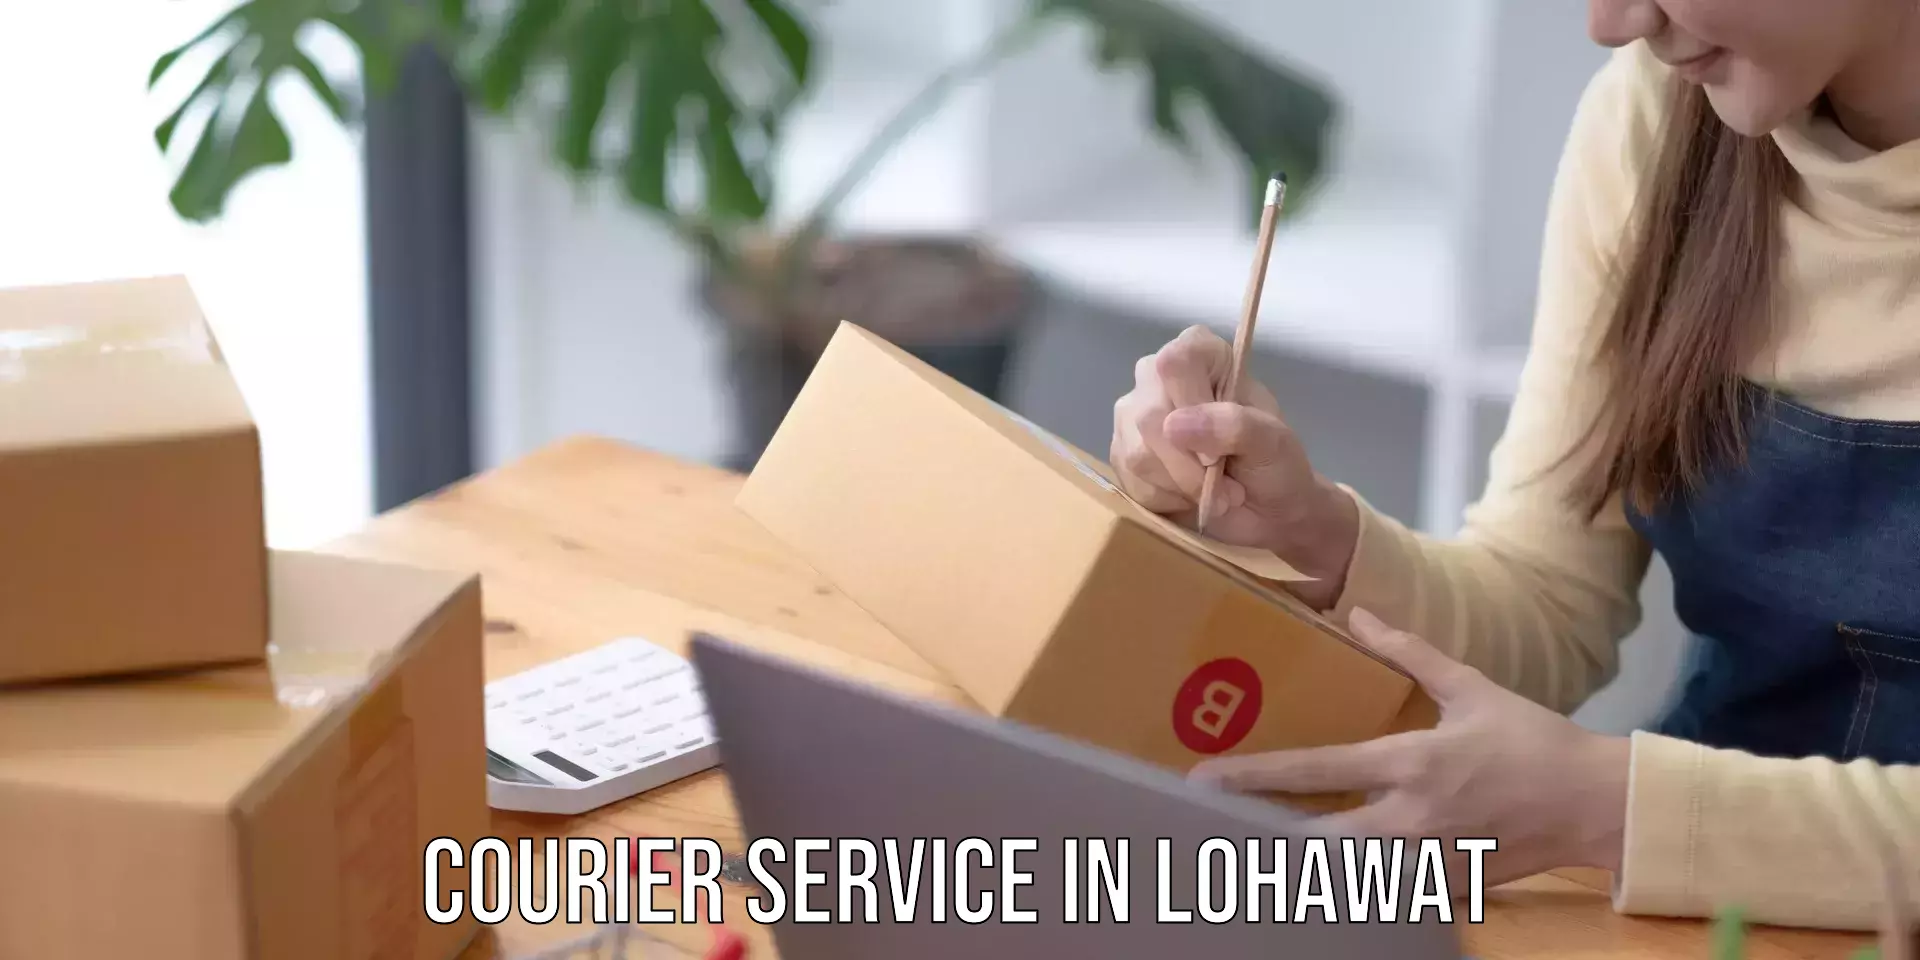 Optimized shipping services in Lohawat